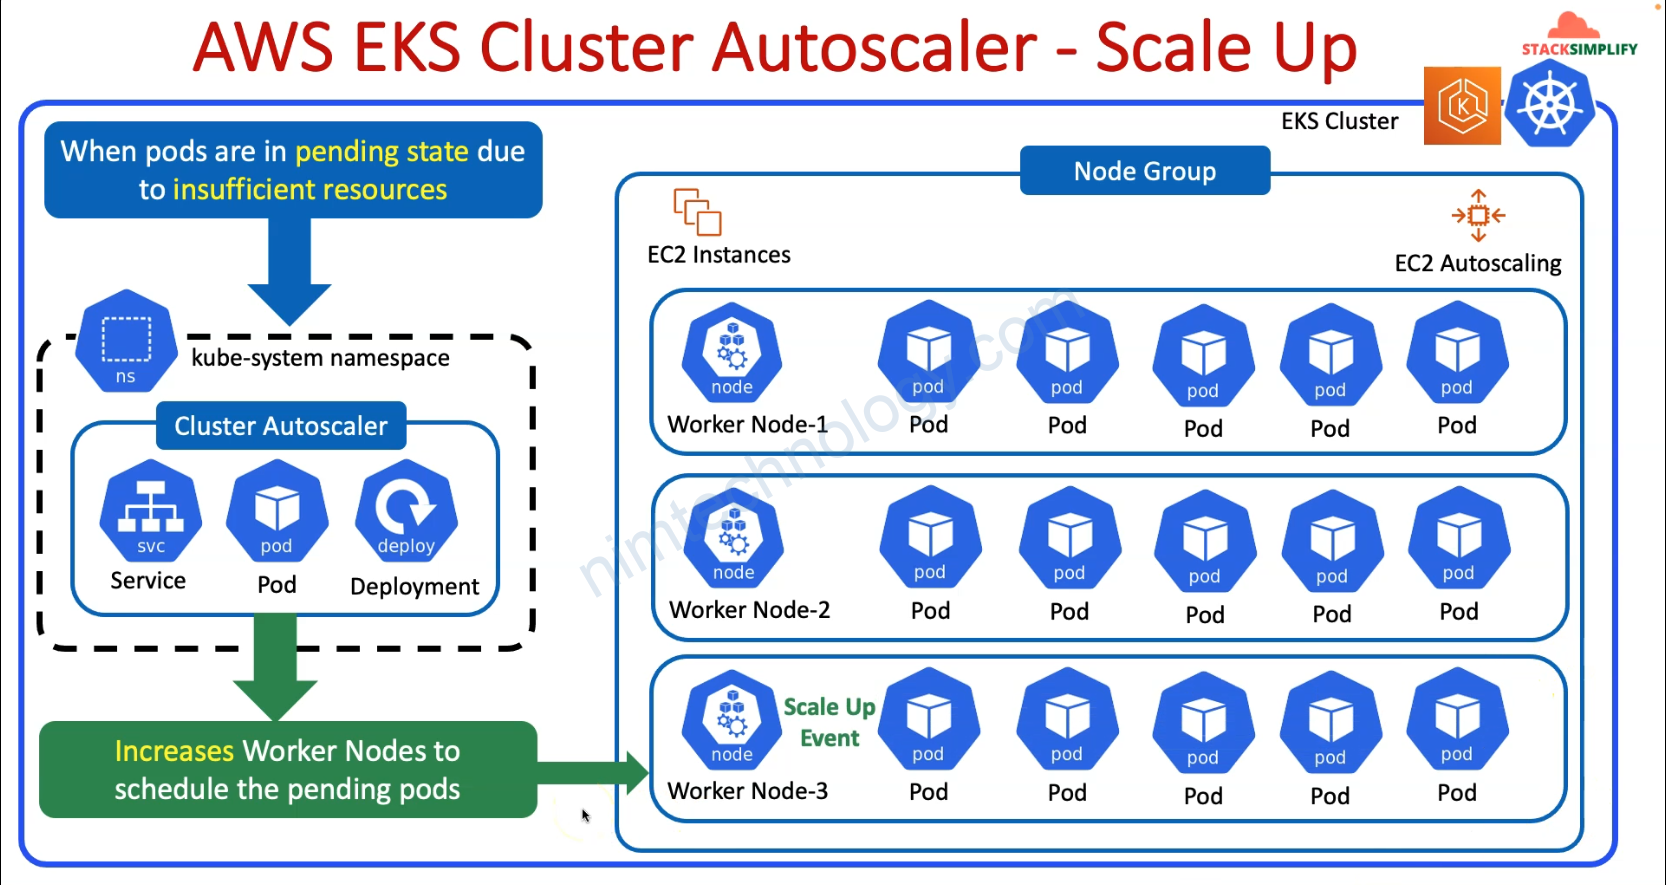 [AWS] Discovering how to design Cluster Autoscaler on EKS.